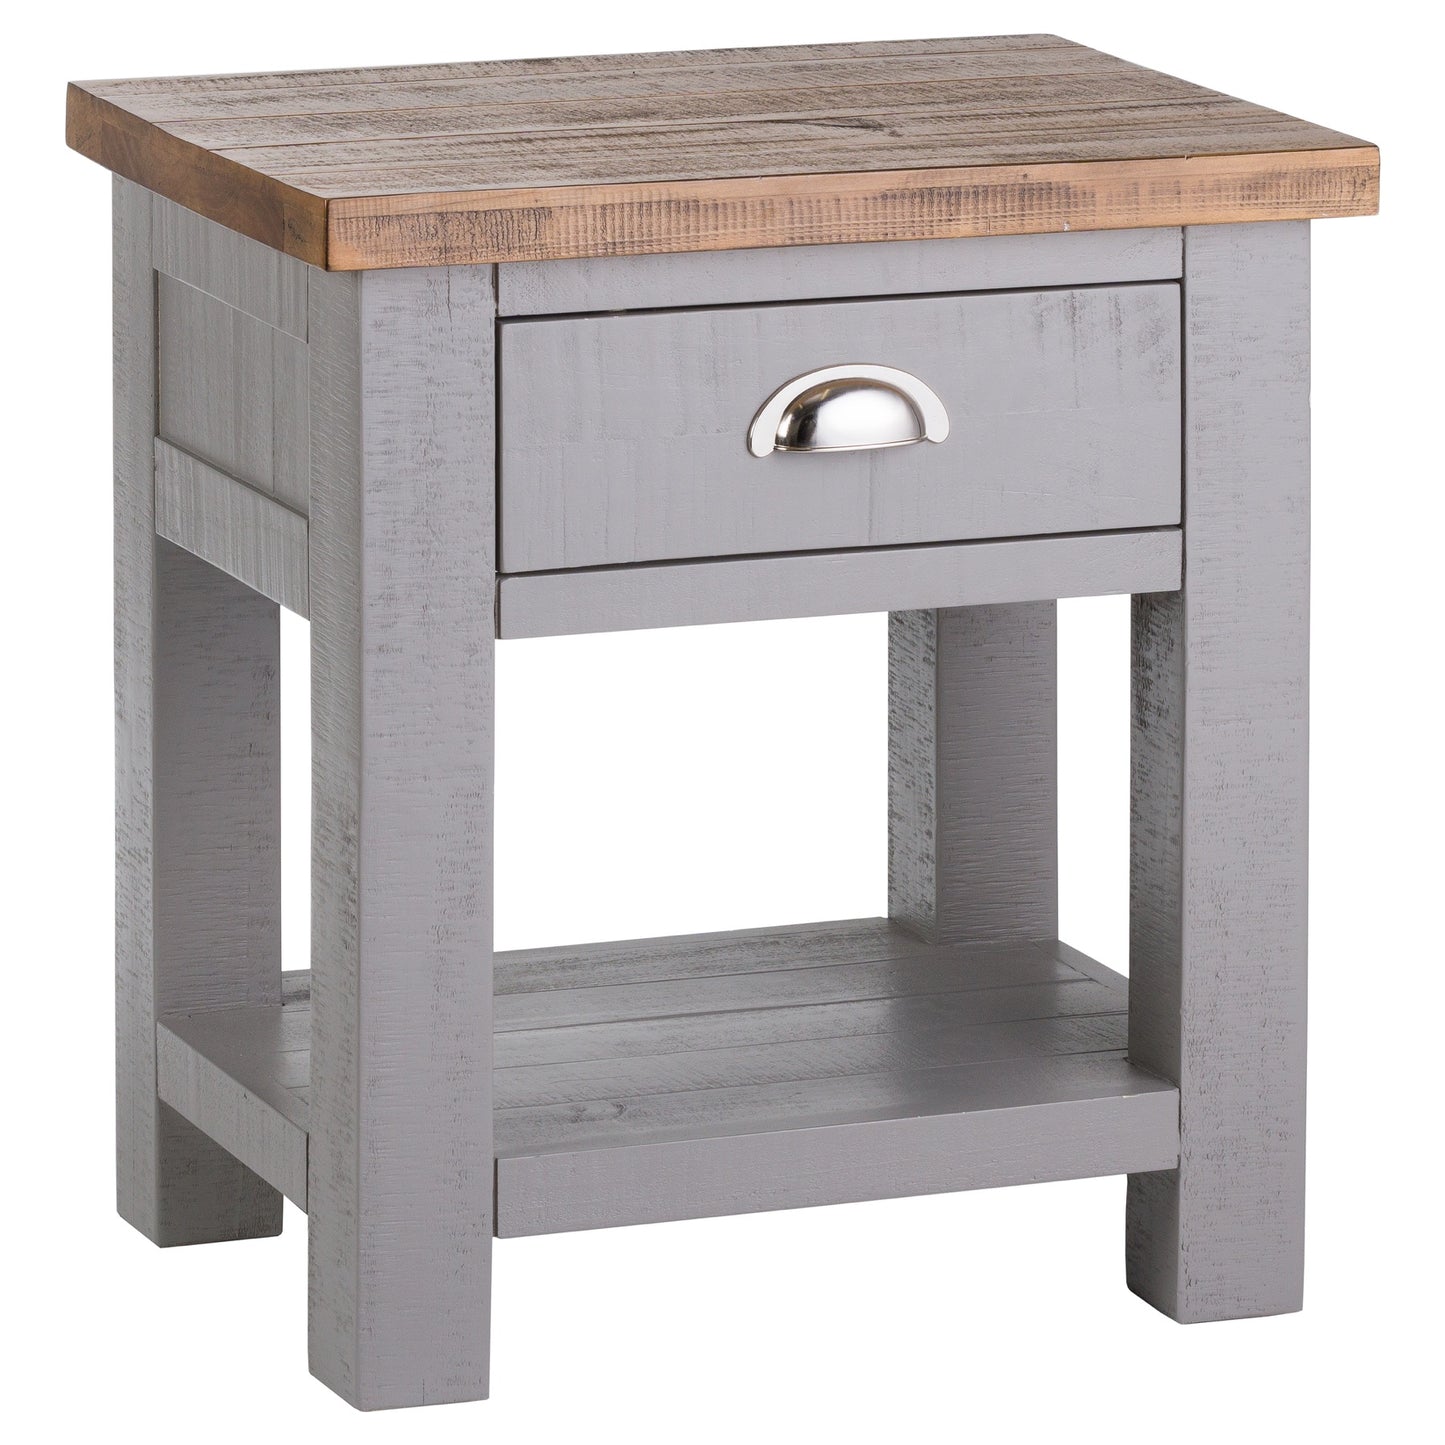 Grey painted One Drawer Side Table